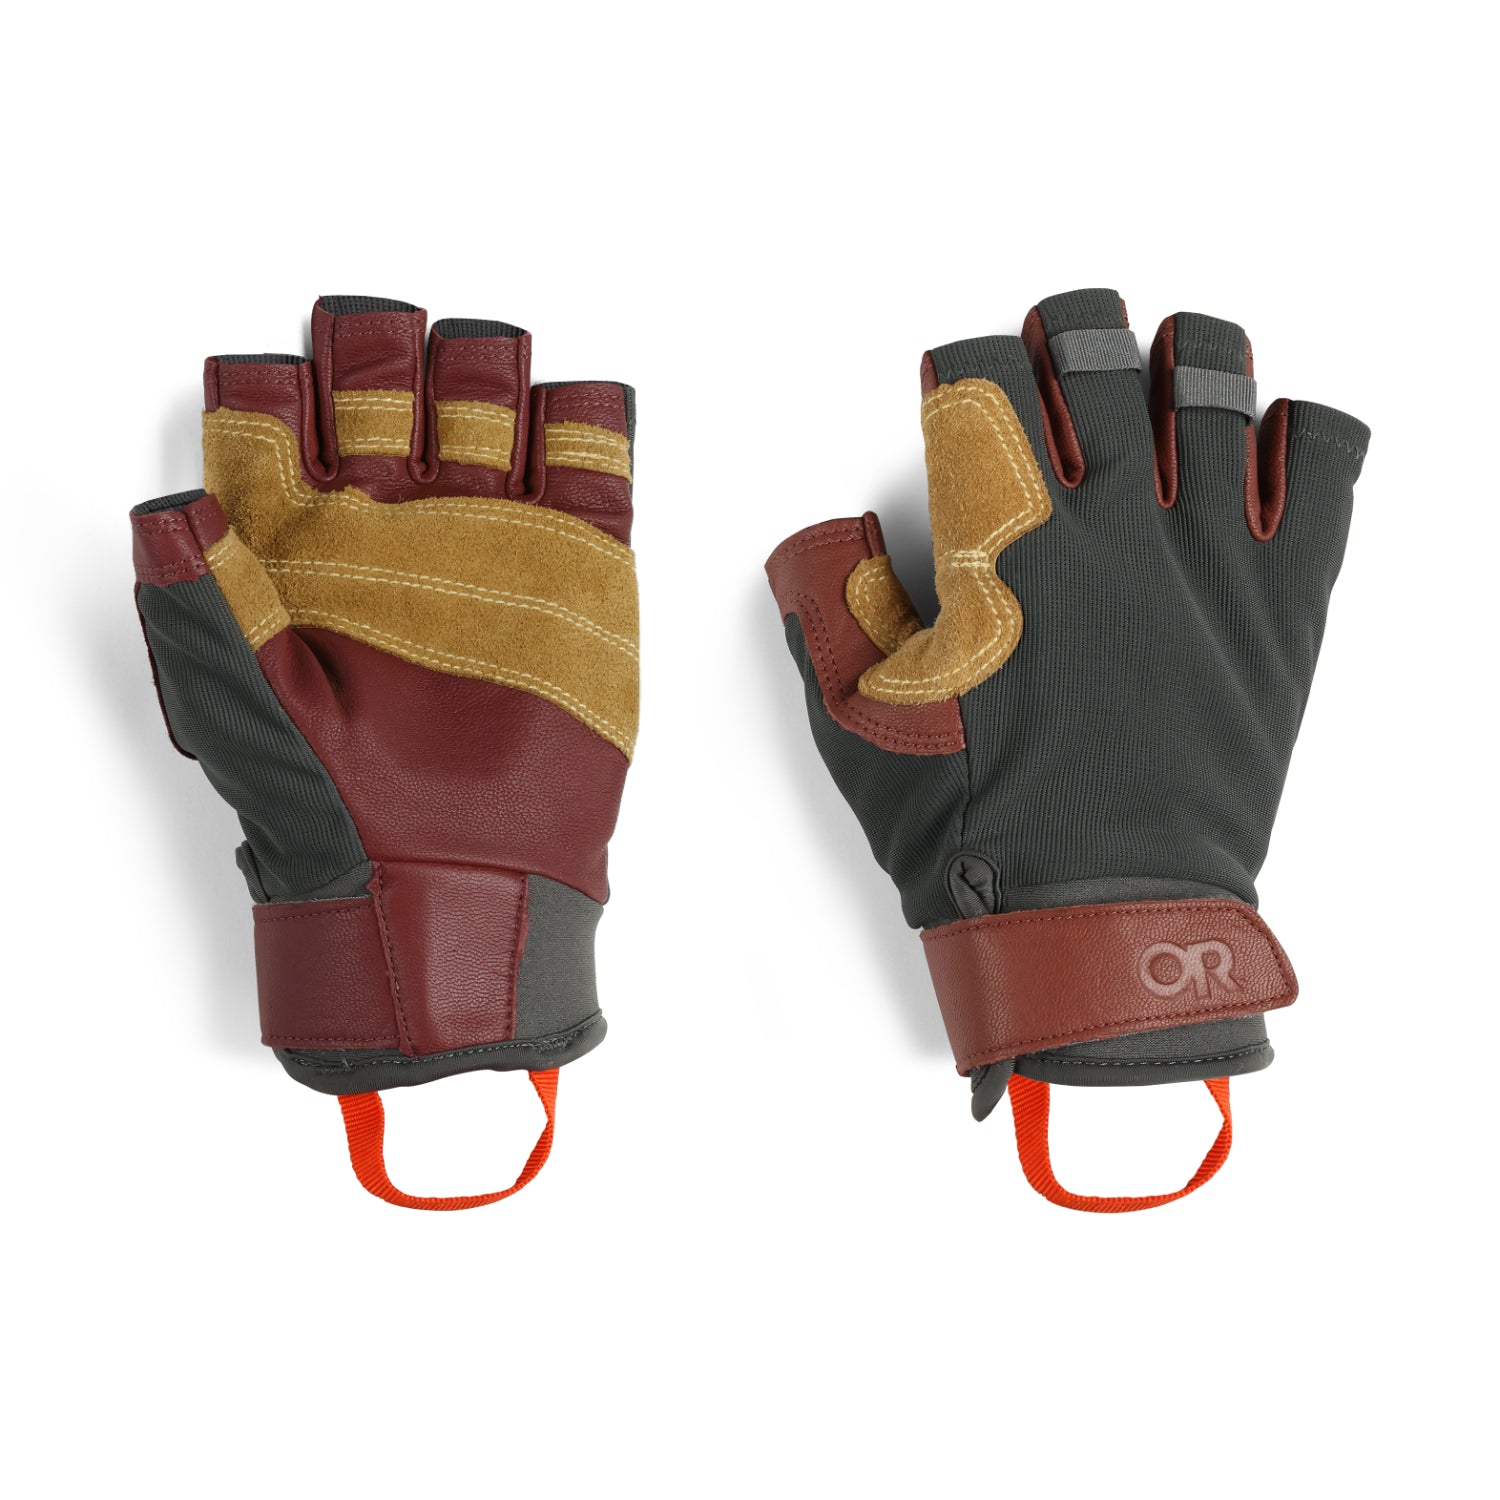 Outdoor Research Fossil Rock Belay Gloves in charcoal brick